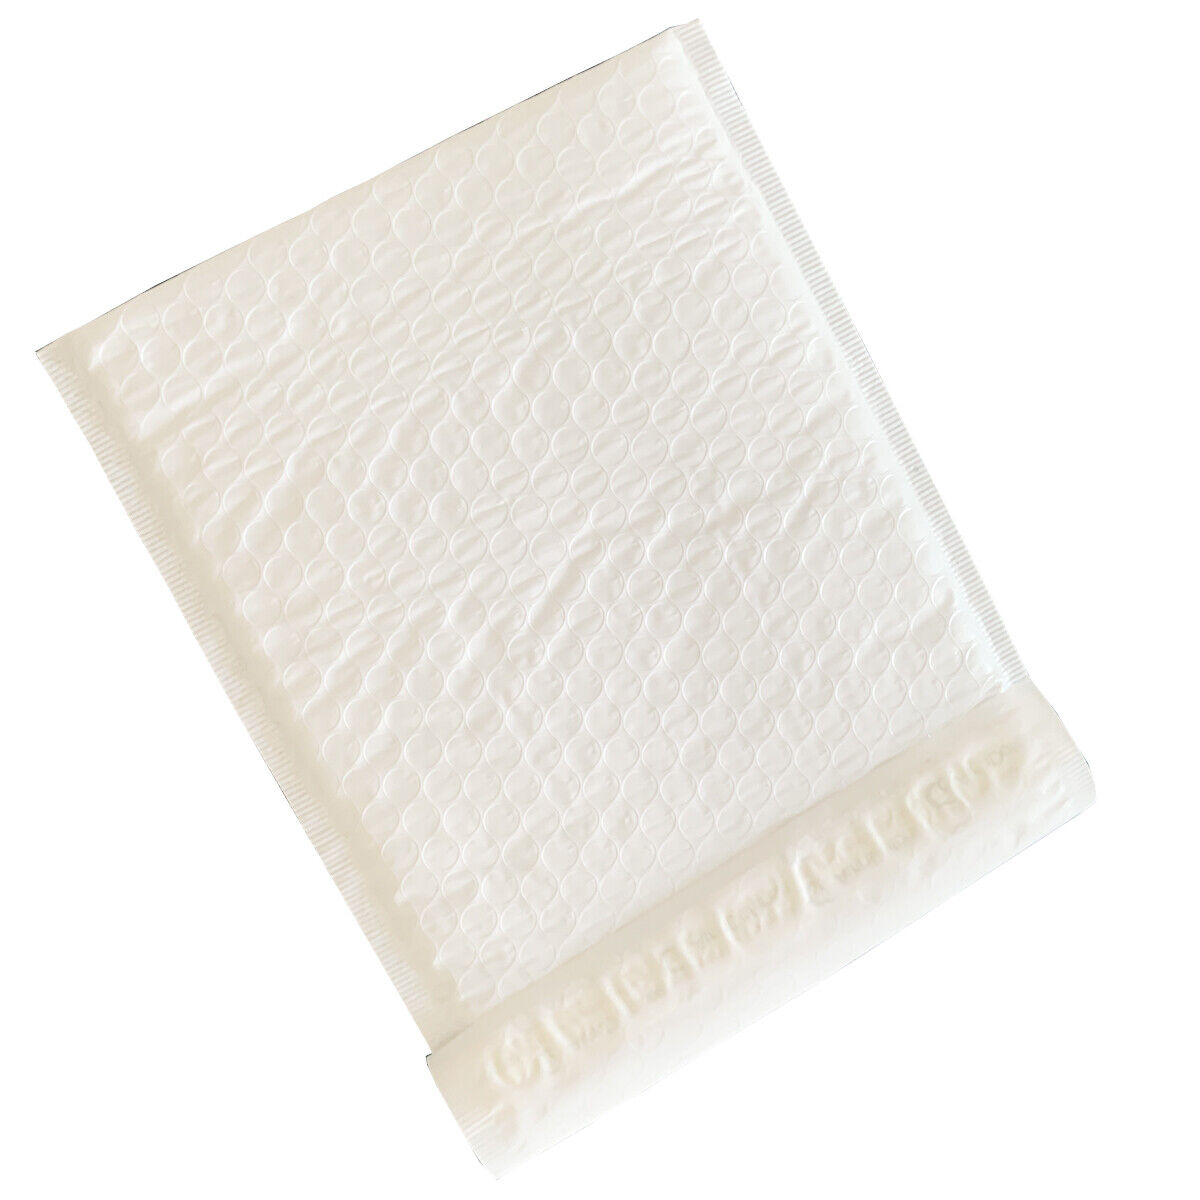 AirnDefense #5 10.5X16" White Poly Bubble Mailers Padded Envelope Shipping Pack